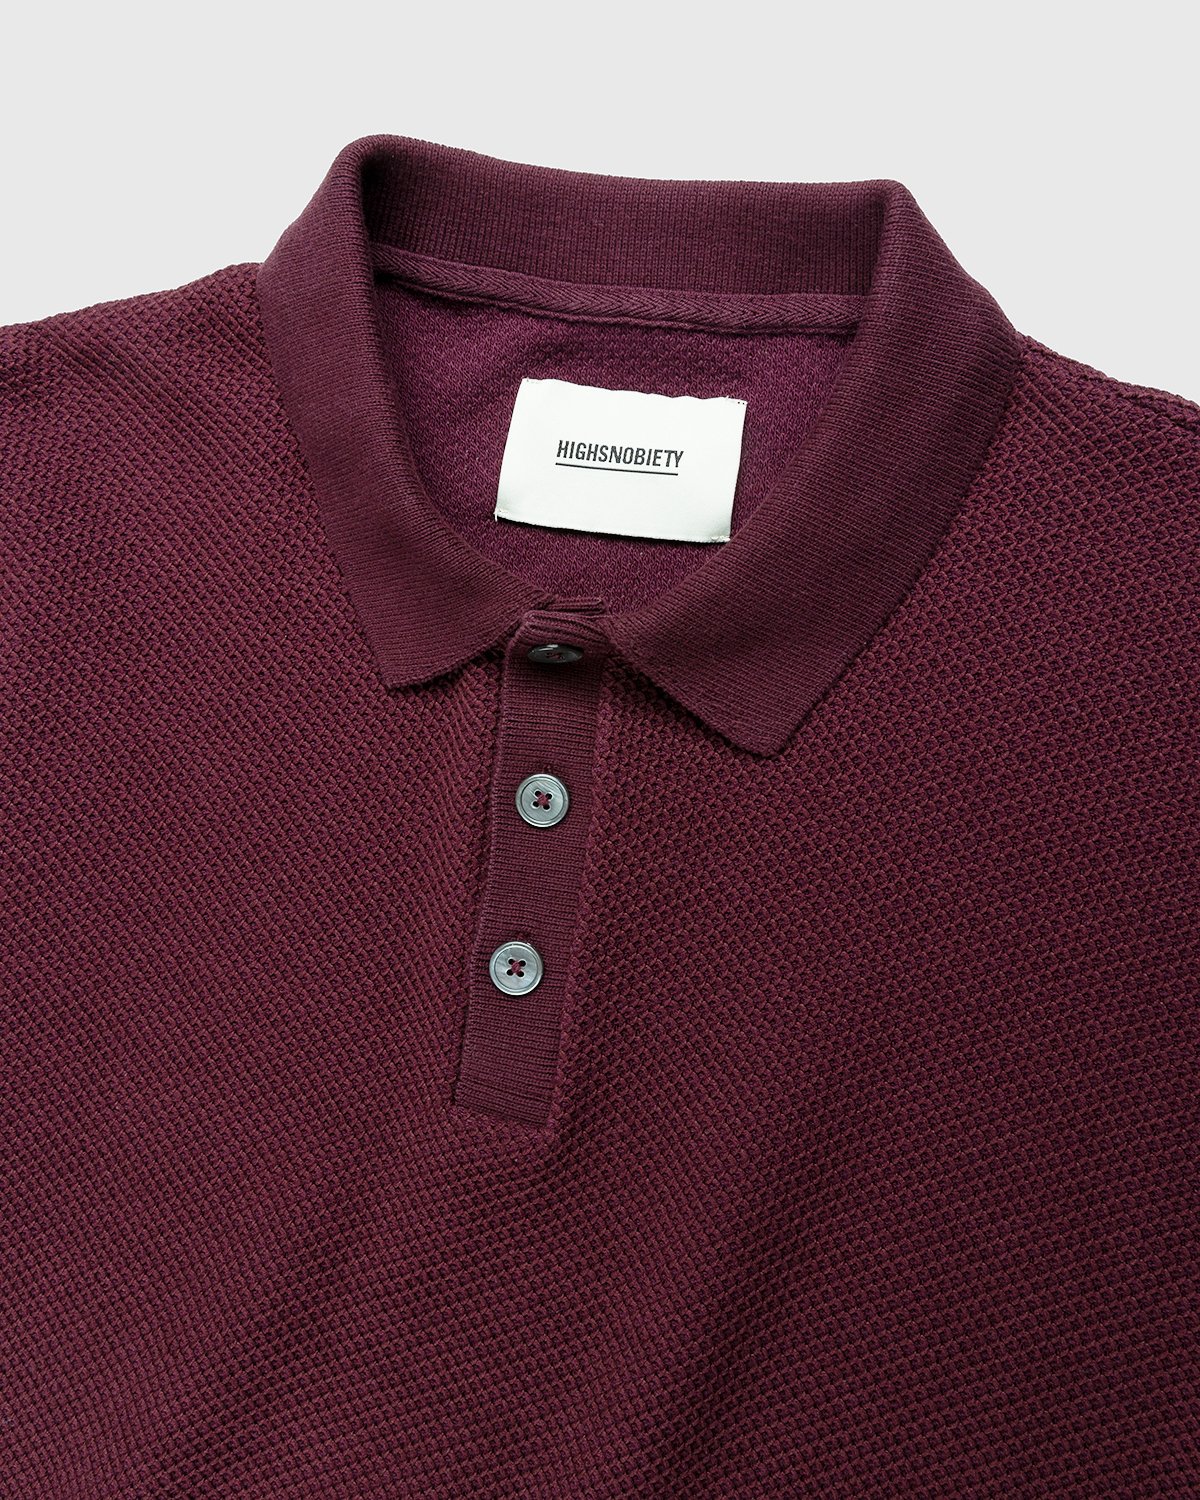 Highsnobiety - Knit Short-Sleeve Polo Bordeaux - Clothing - Brown - Image 5